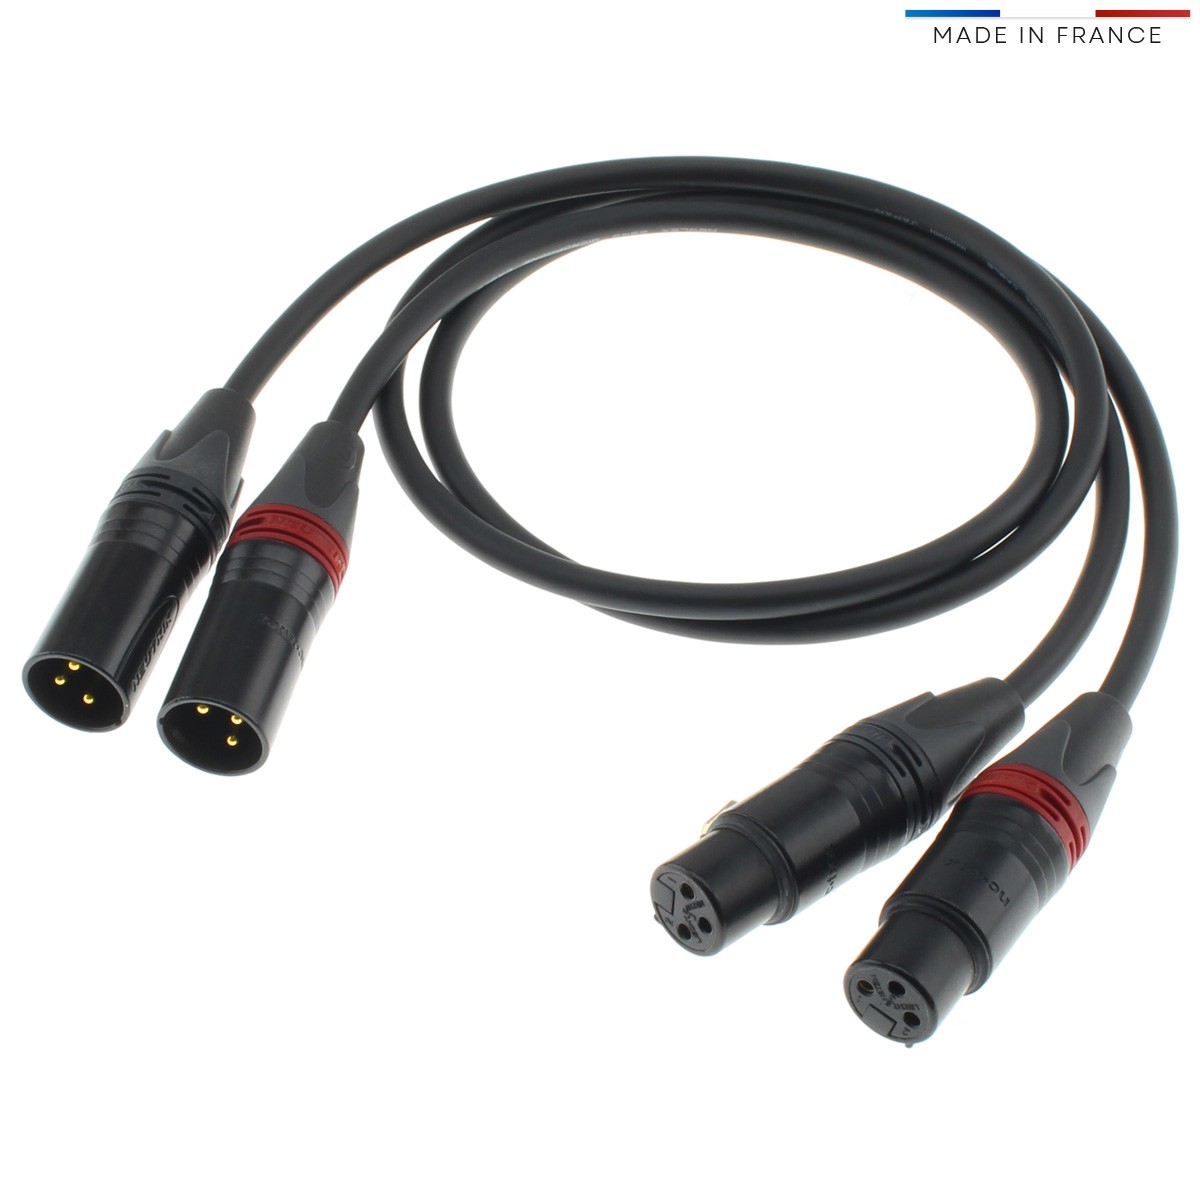 AUDIOPHONICS WIRE Interconnect Cable Stereo XLR OFC Copper Gold Plated 3m (Pair)